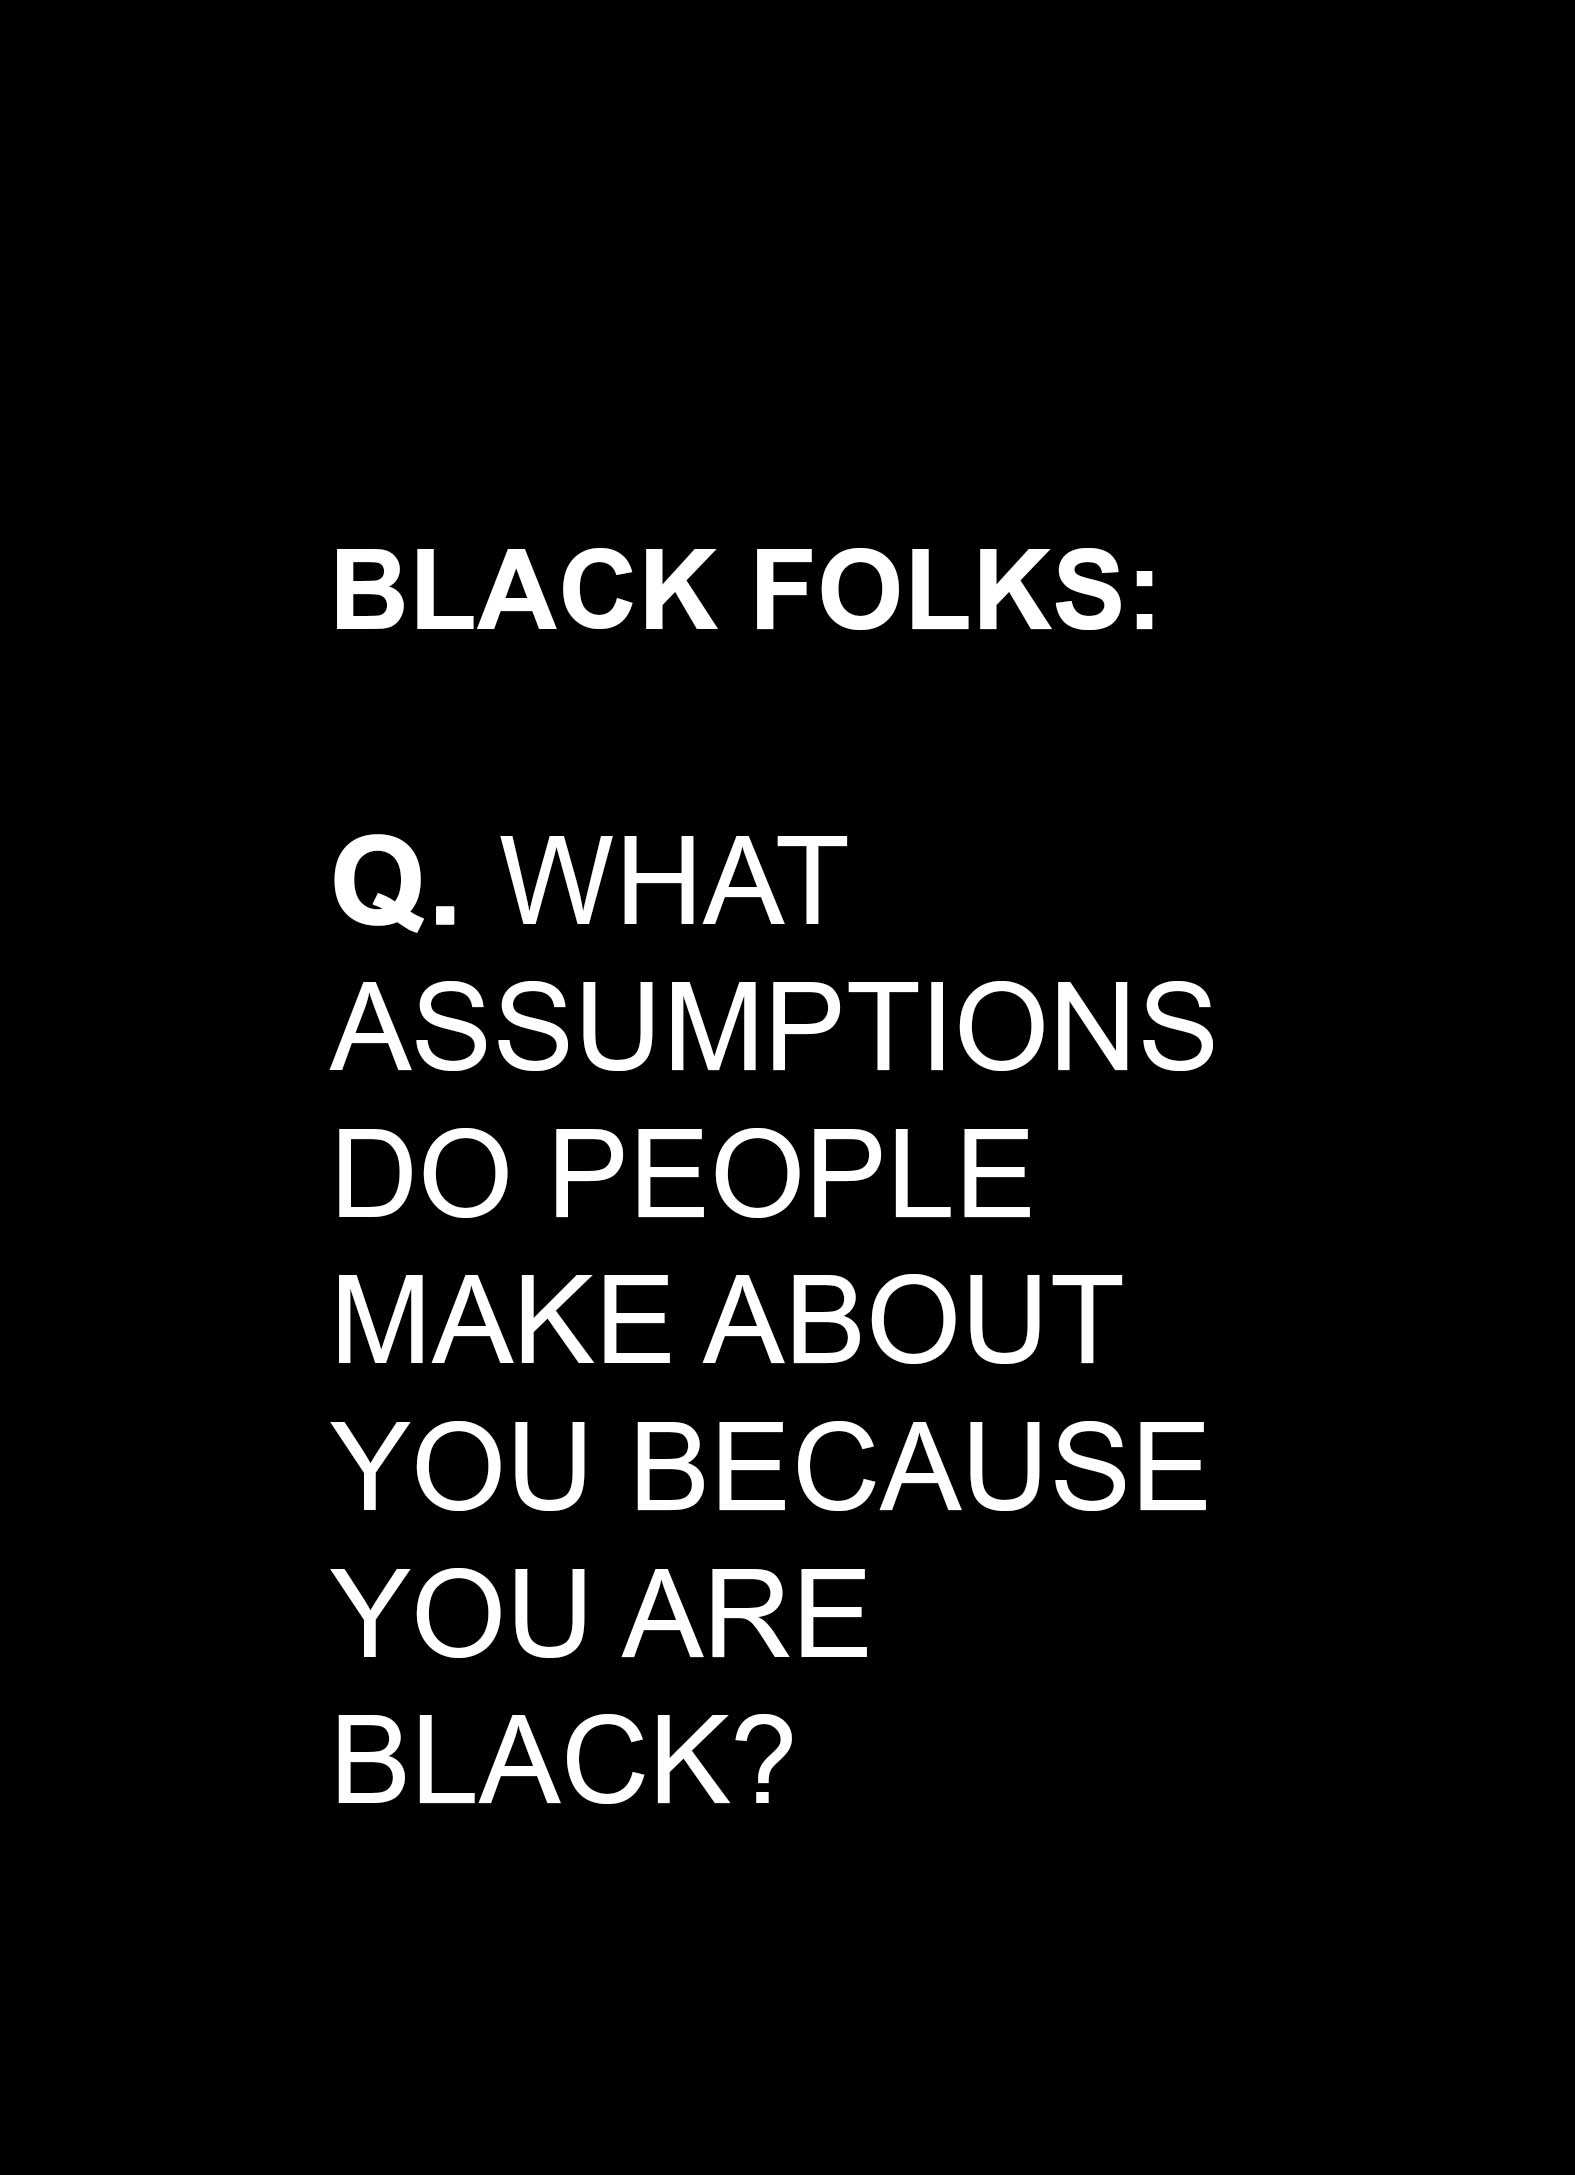 Black folks: Q. What assumptions do people make about you because you are black?